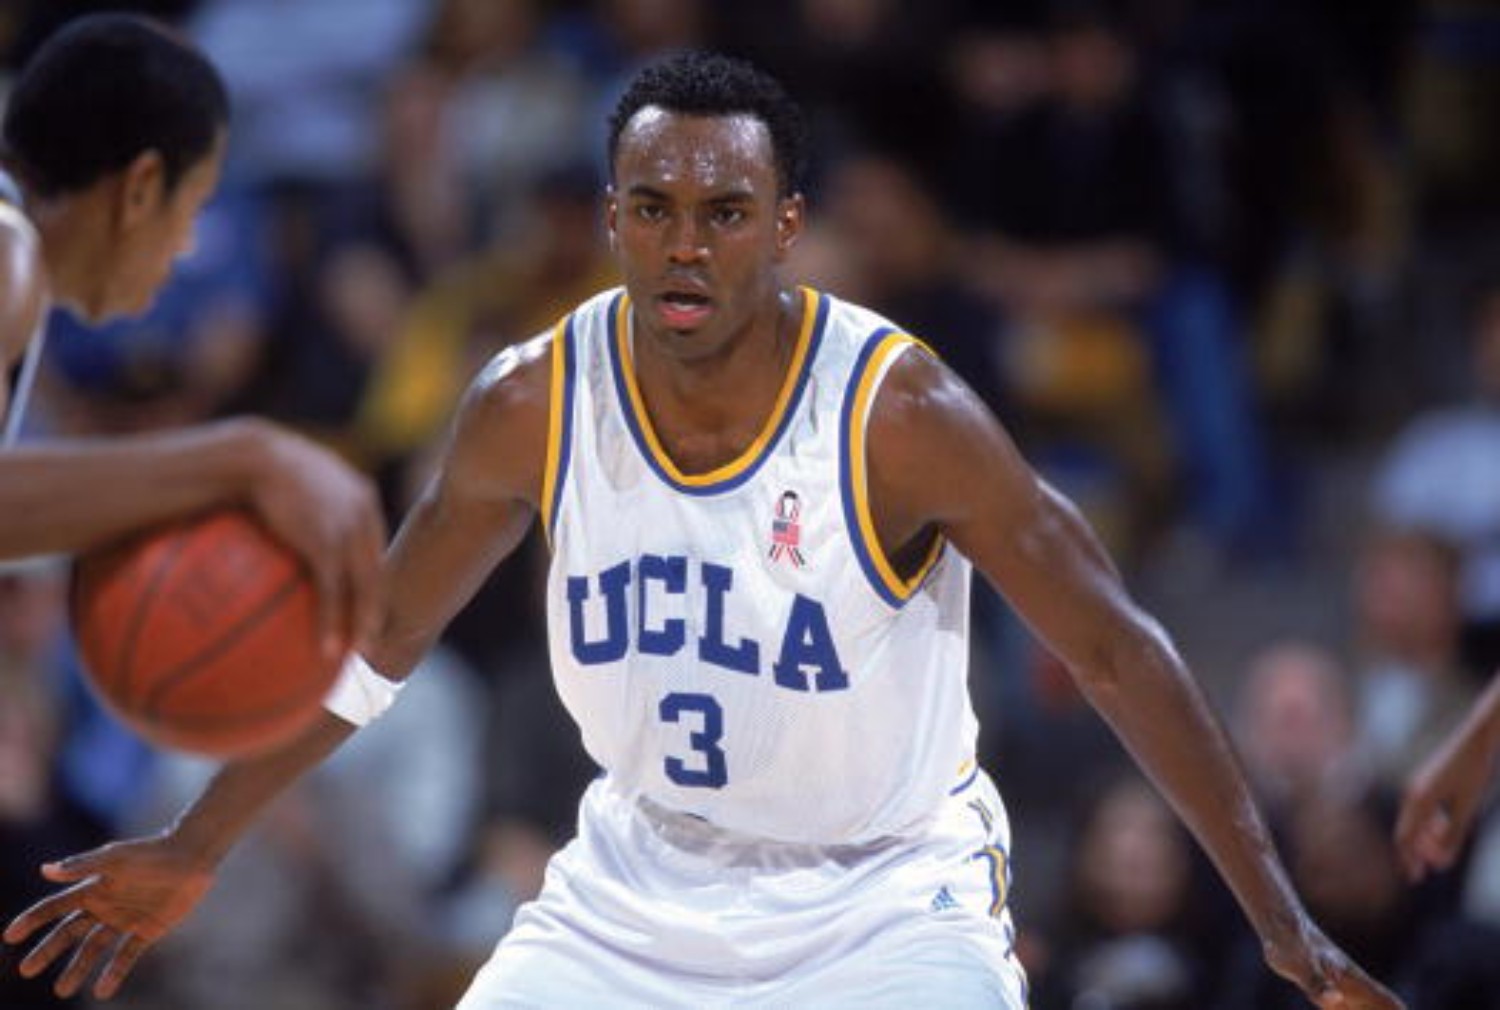 Billy Knight spent five years at UCLA